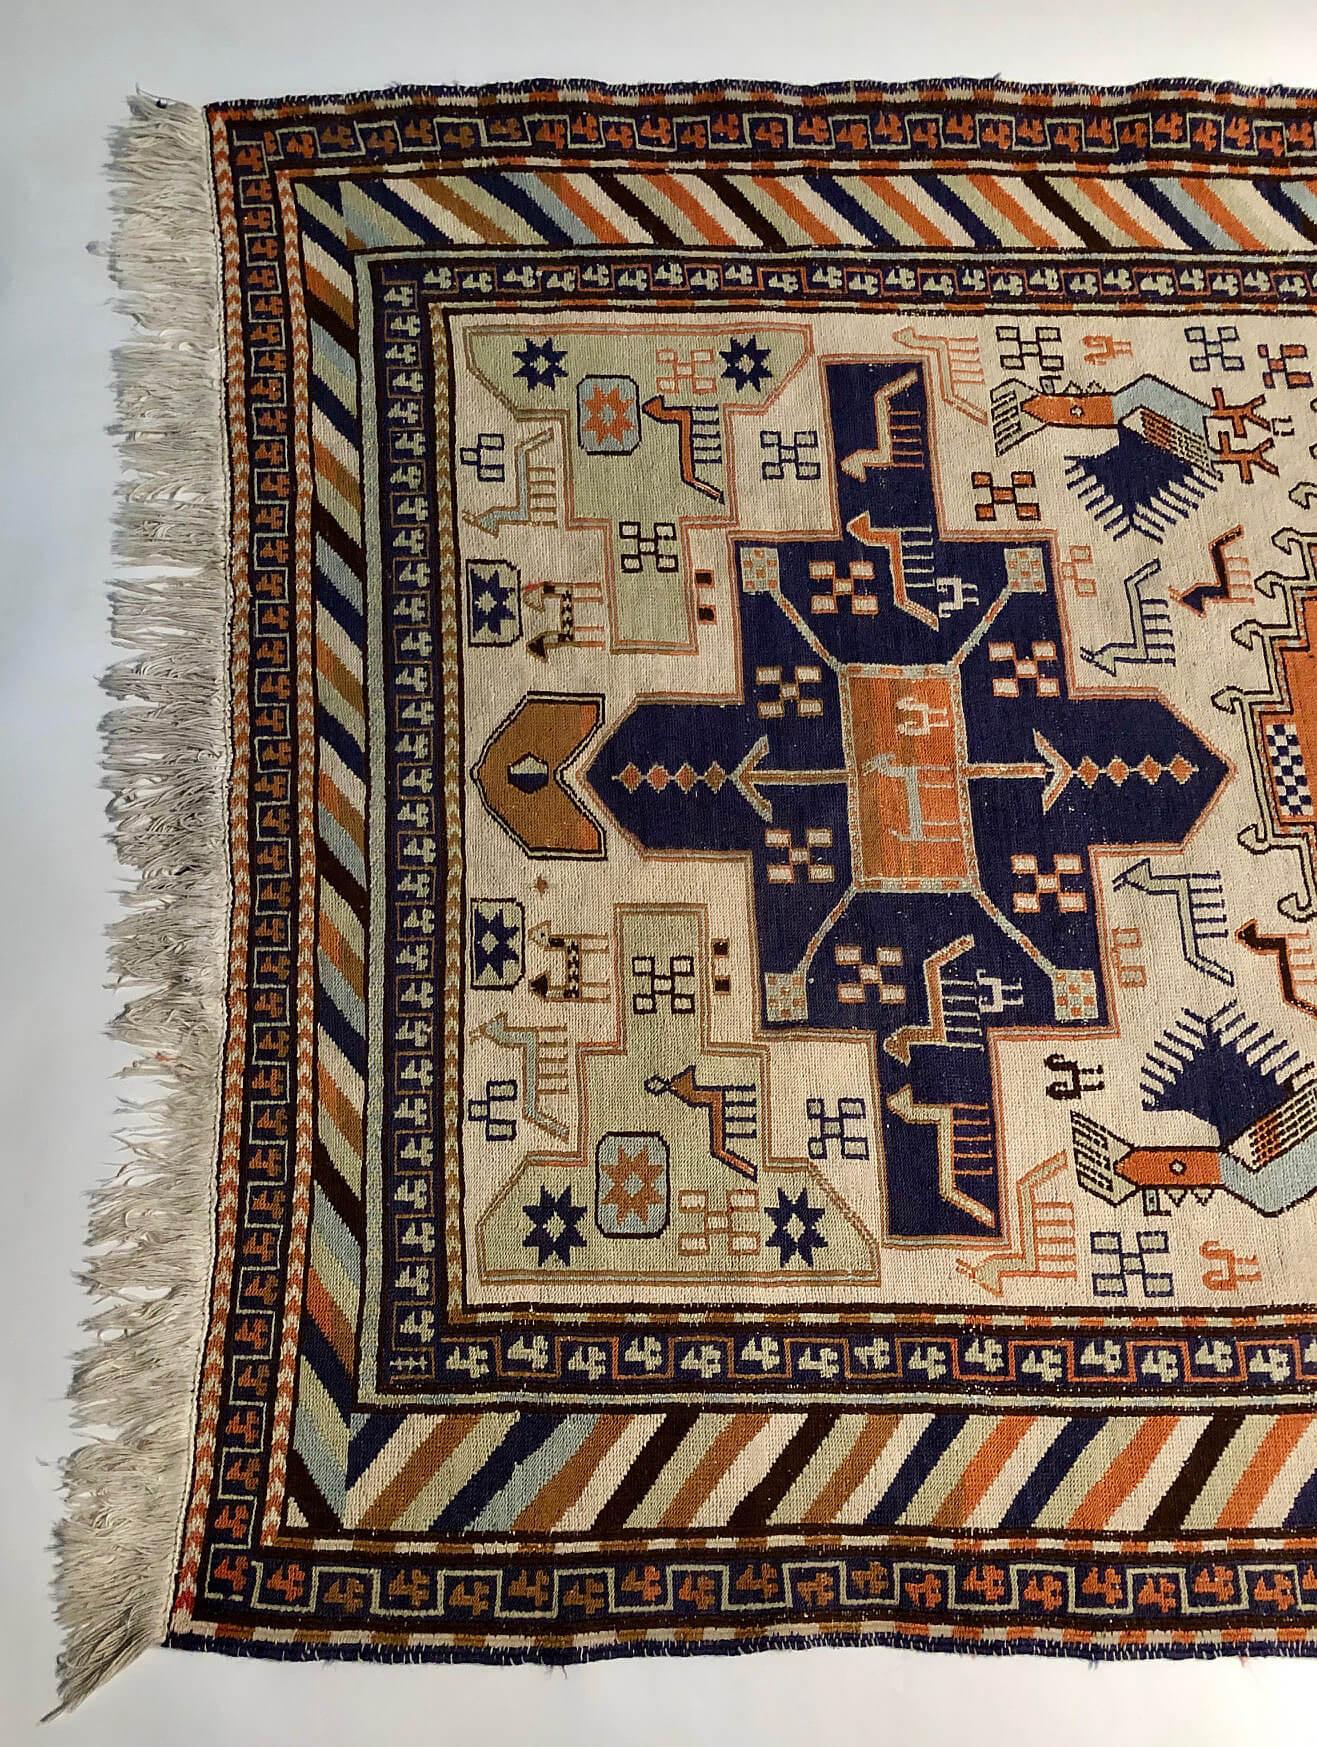 Vintage or semi-antique circa 1970 Persian Heriz Karajeh flat-weave tribal rug having cream ground with navy, orange, brown, light green and blue triple medallion, horse, and bird motifs in field and 'sergeant's stripe' border. 

Produced by women